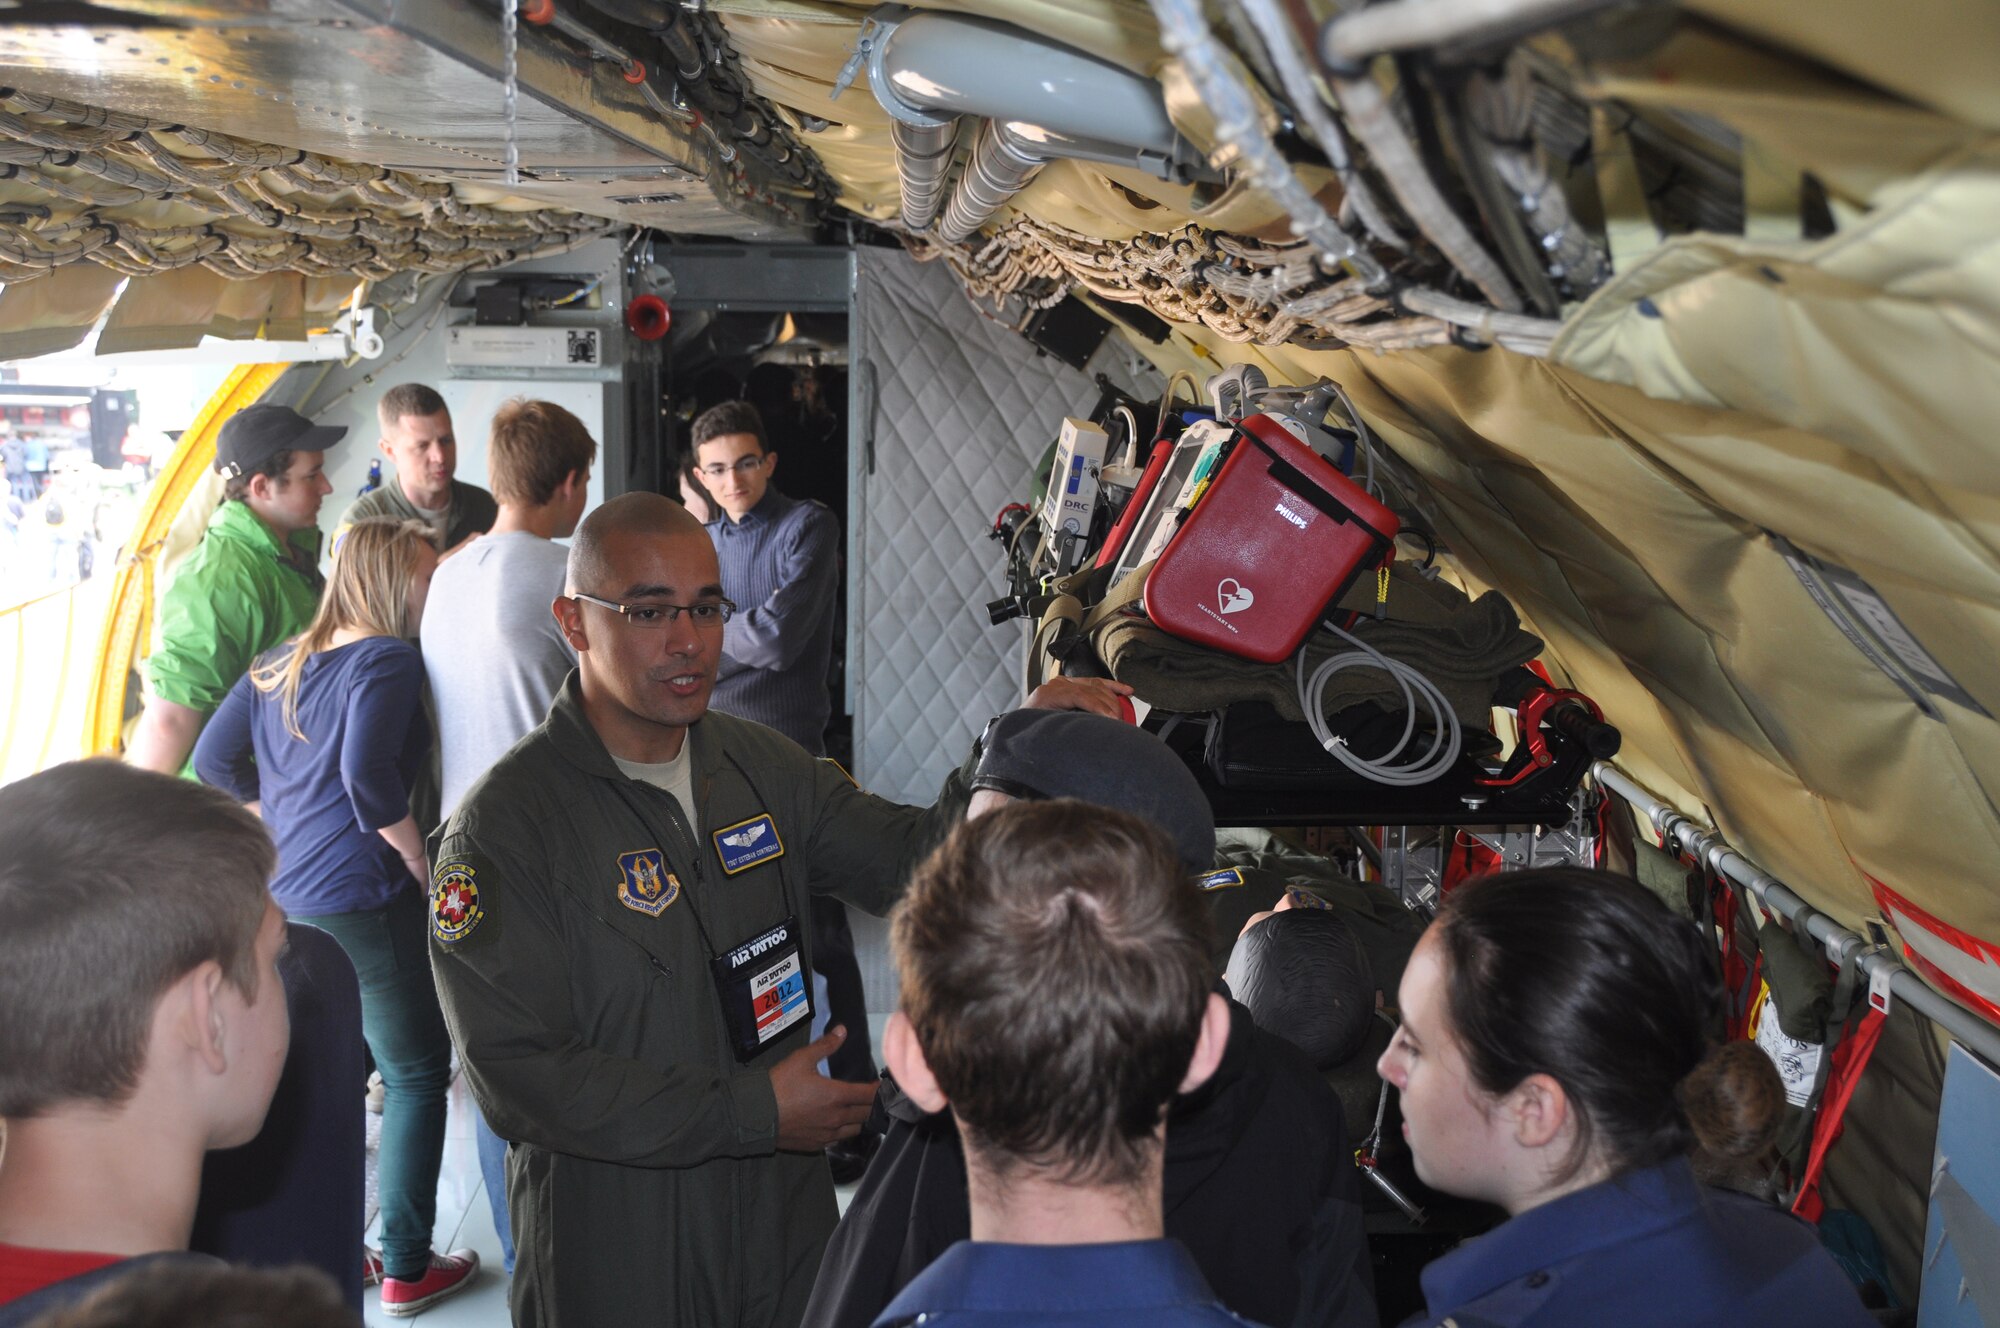 Tech Sgt. Esteban Contreras, an aeromedical medical technician from Joint Base Andrews, Md., shares his military experience with Royal Air Force cadets at the annual international air show held July 7-8 at RAF Fairford in the United Kingdom. (U.S. Air Force photo/Master Sgt. Donna T. Jeffries)